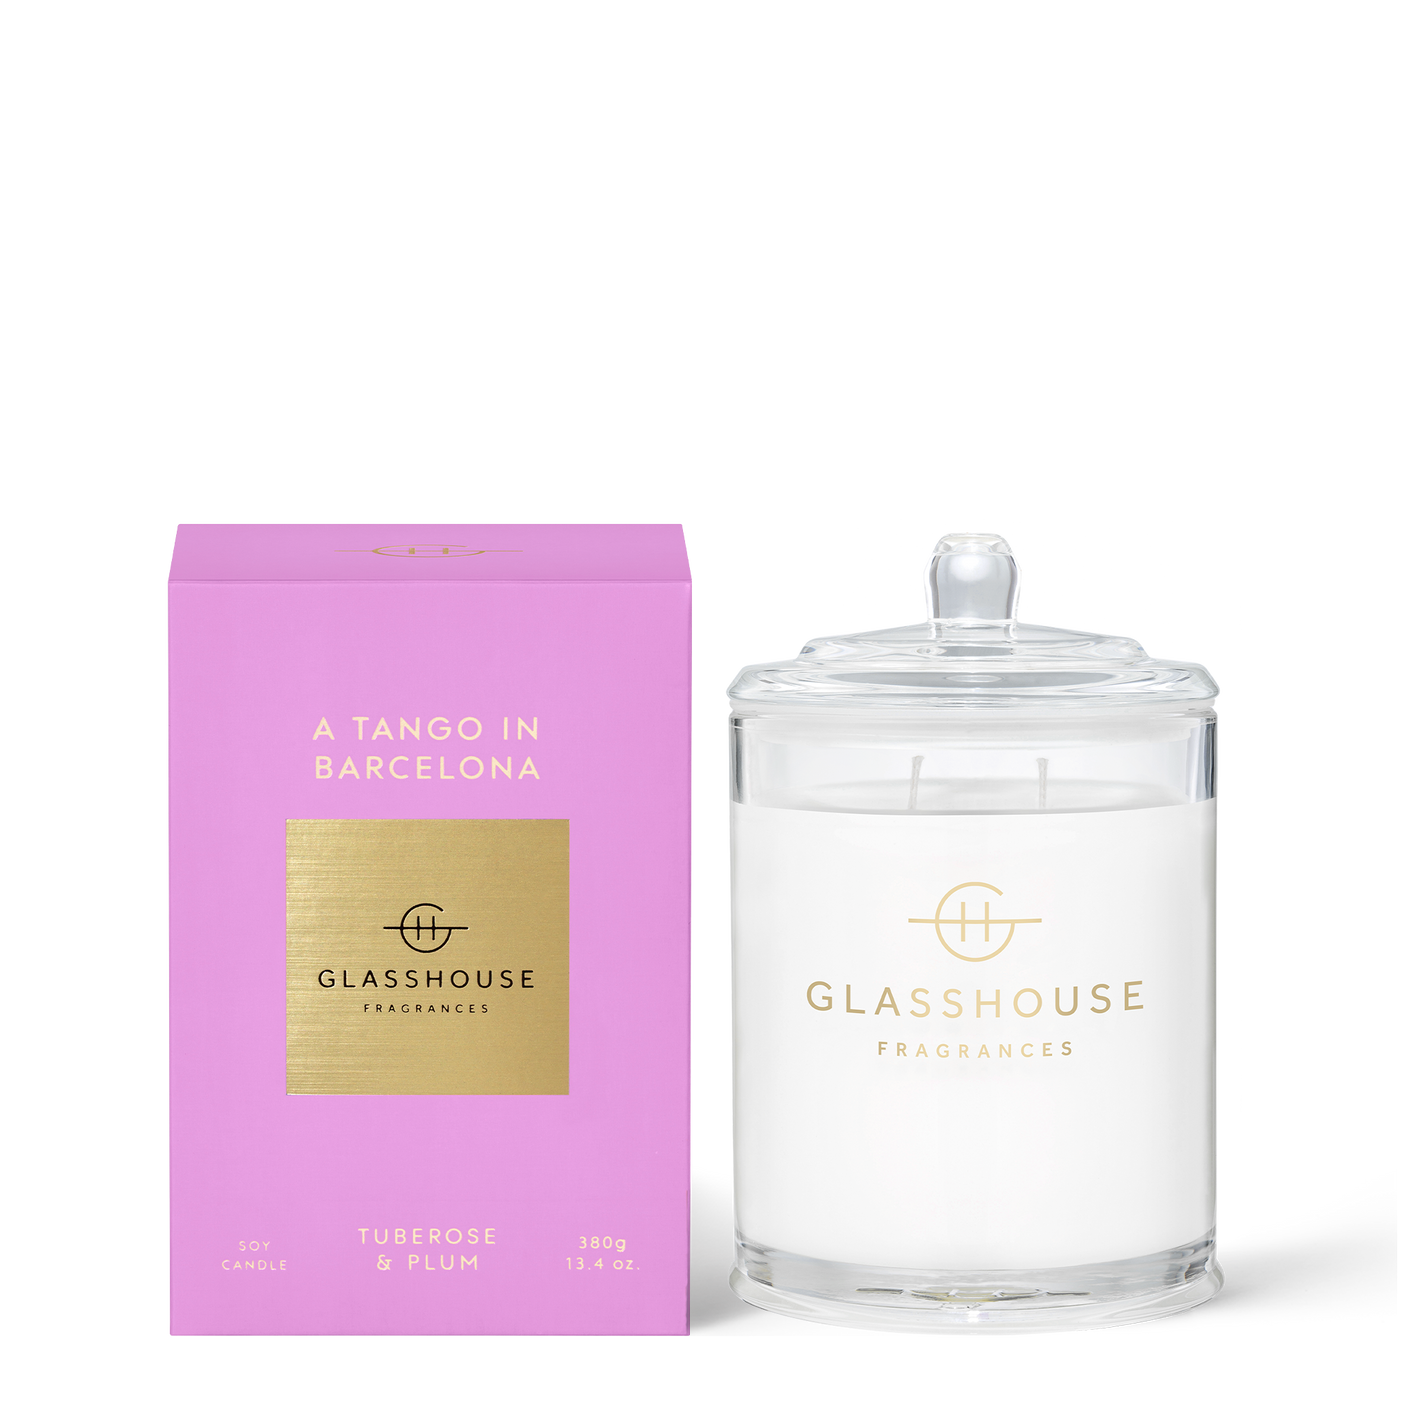 Glasshouse Fragrances A TANGO IN BARCELONA 380g Triple Scented Soy Candle